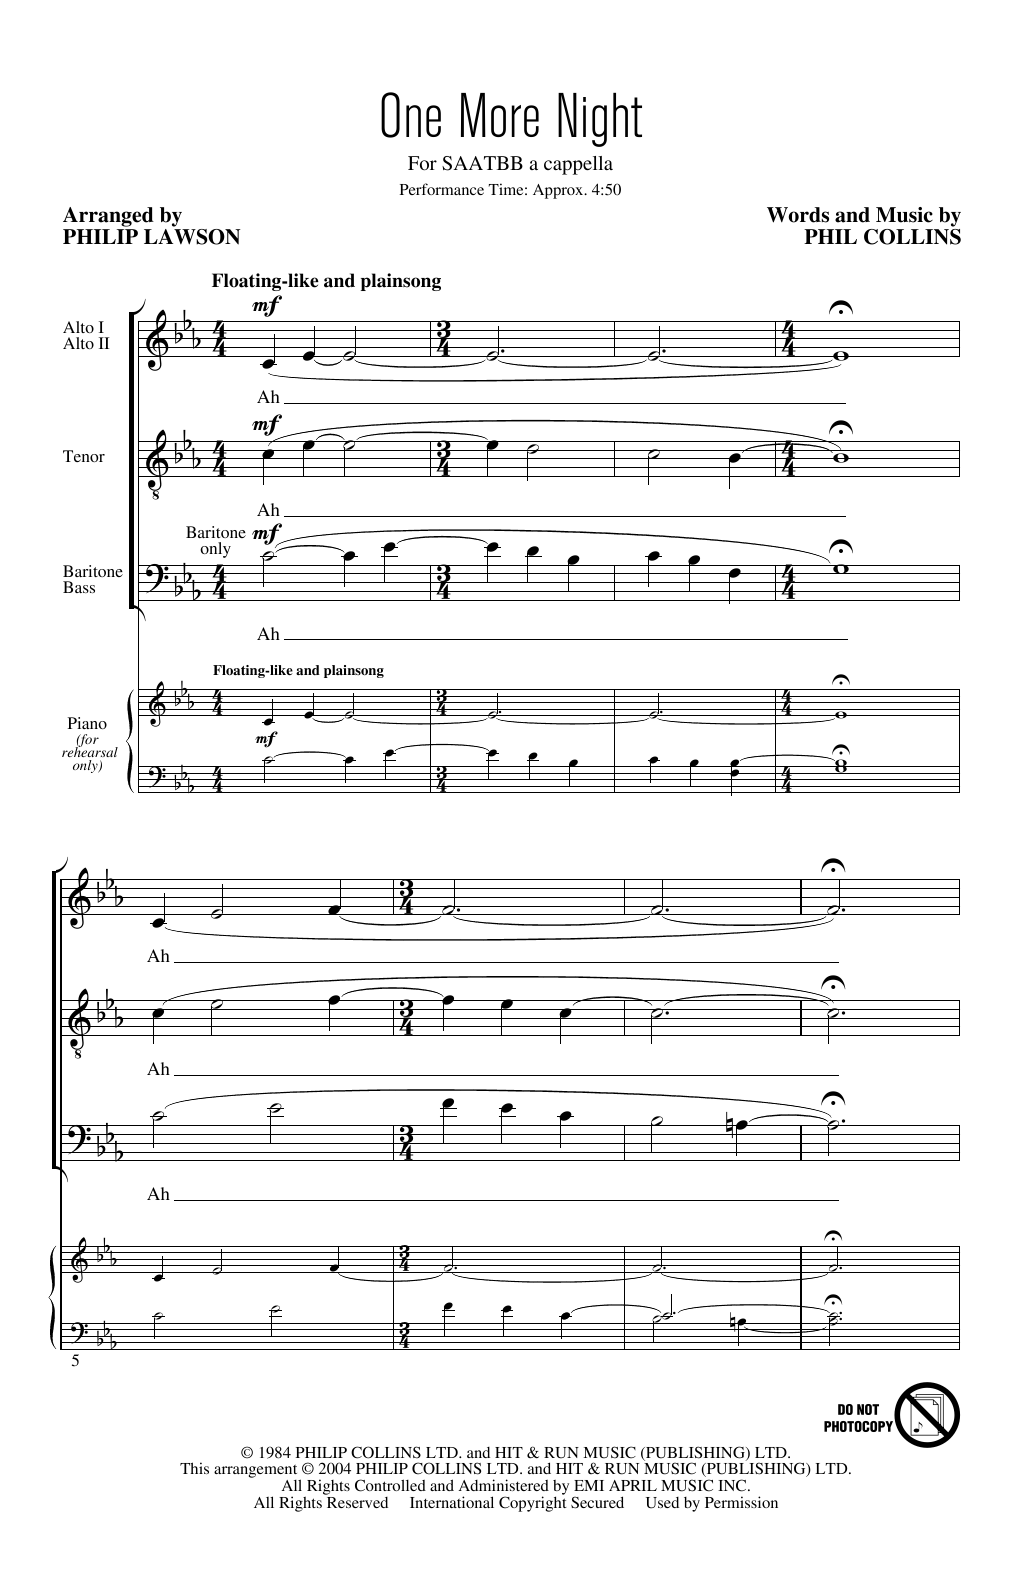 Download Phil Collins One More Night (arr. Philip Lawson) Sheet Music